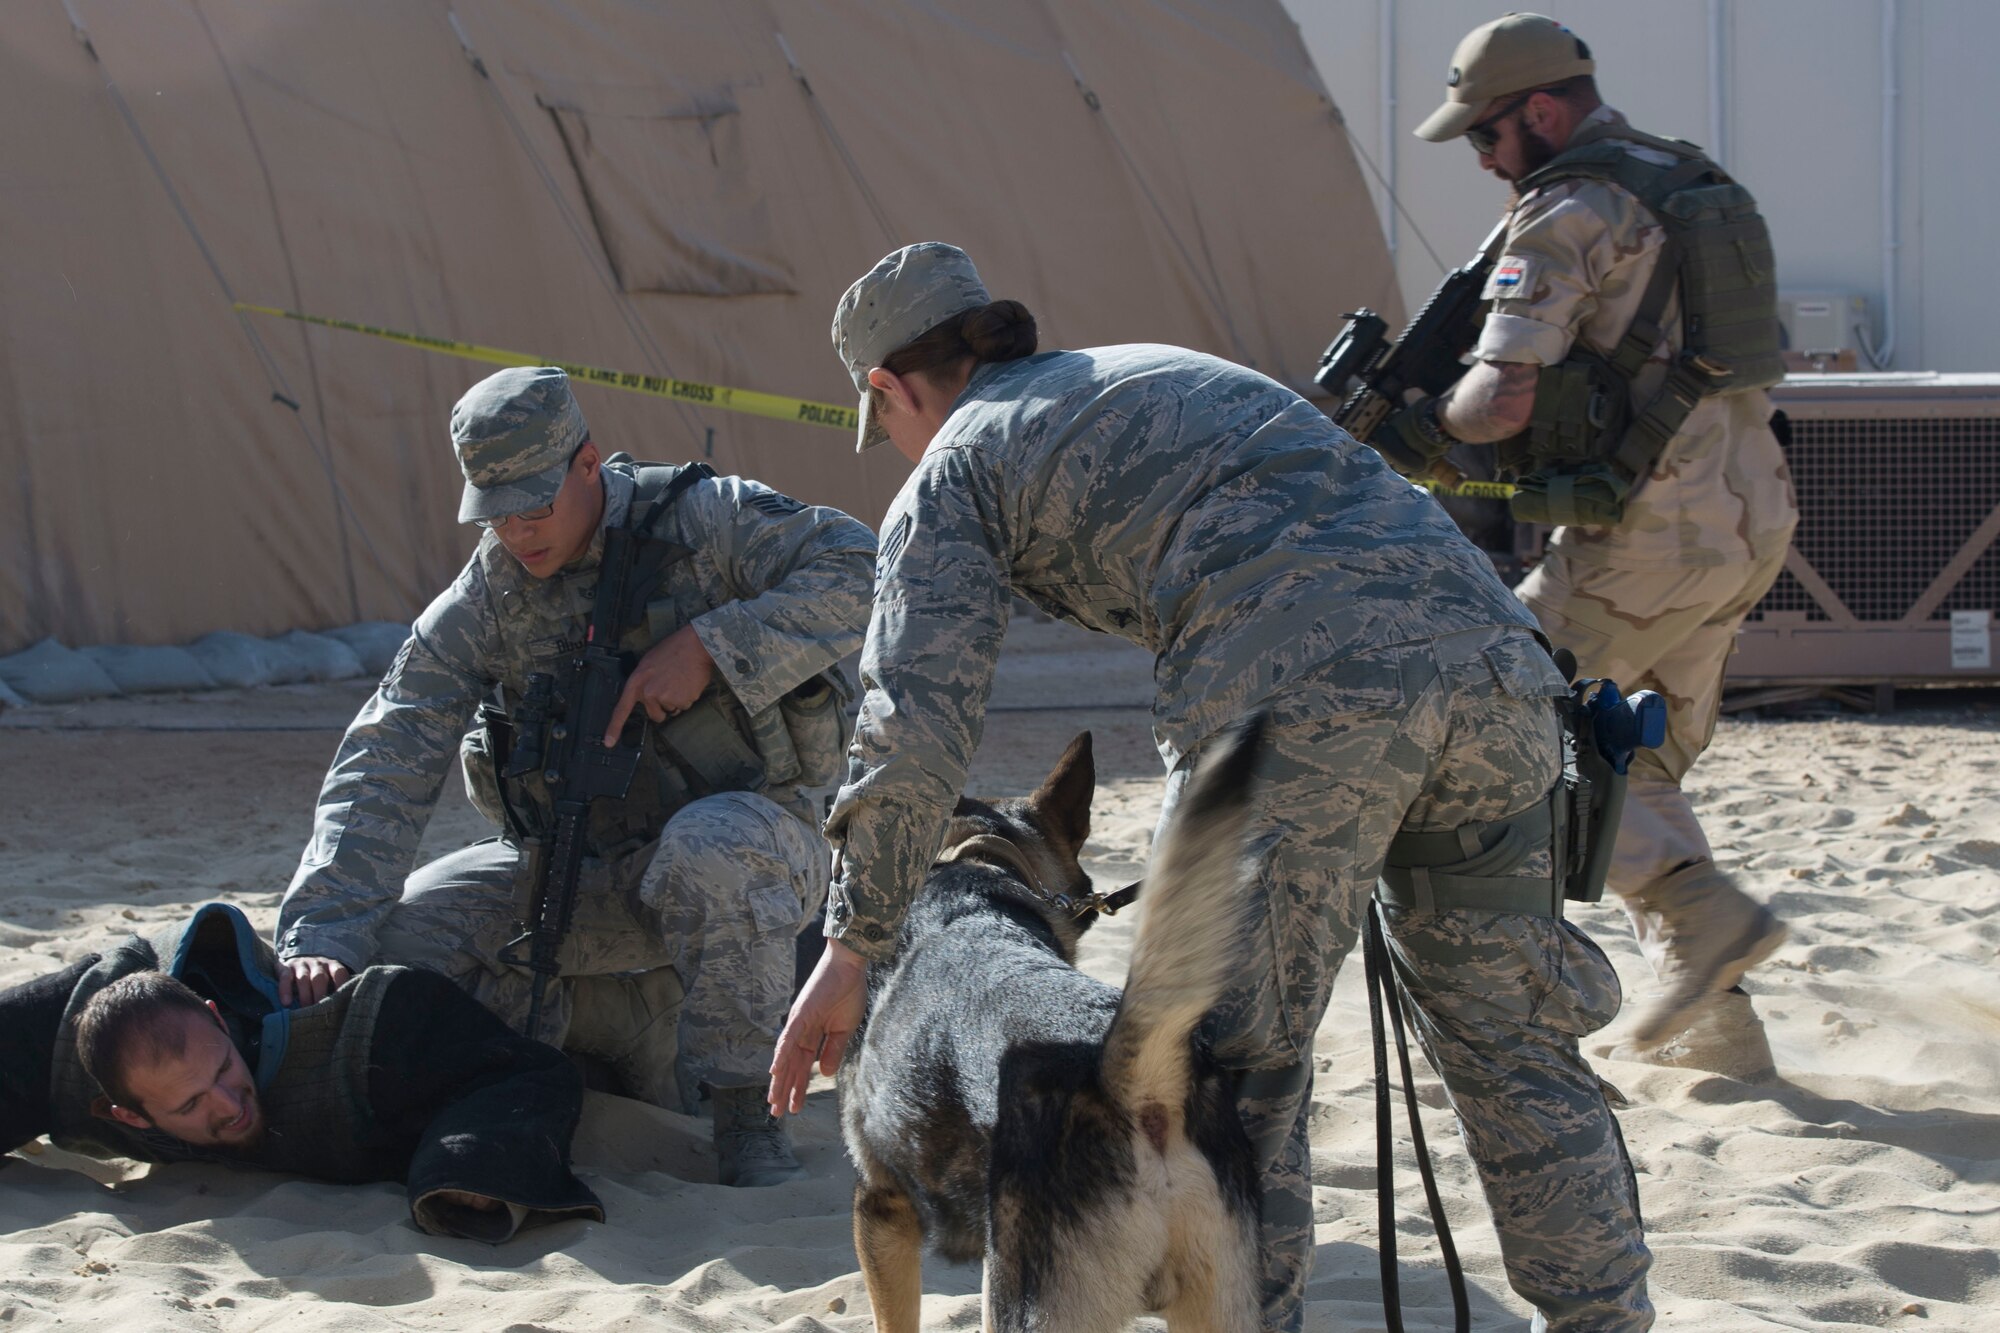 Security forces members from the 332nd Expeditionary Security Forces Squadron detain a subject during a demonstration, Feb. 25, 2017, in Southwest Asia. The demonstration showcased military working dogs skills and coalition partnership. (U.S. Air Force photo by Staff Sgt. Eboni Reams)